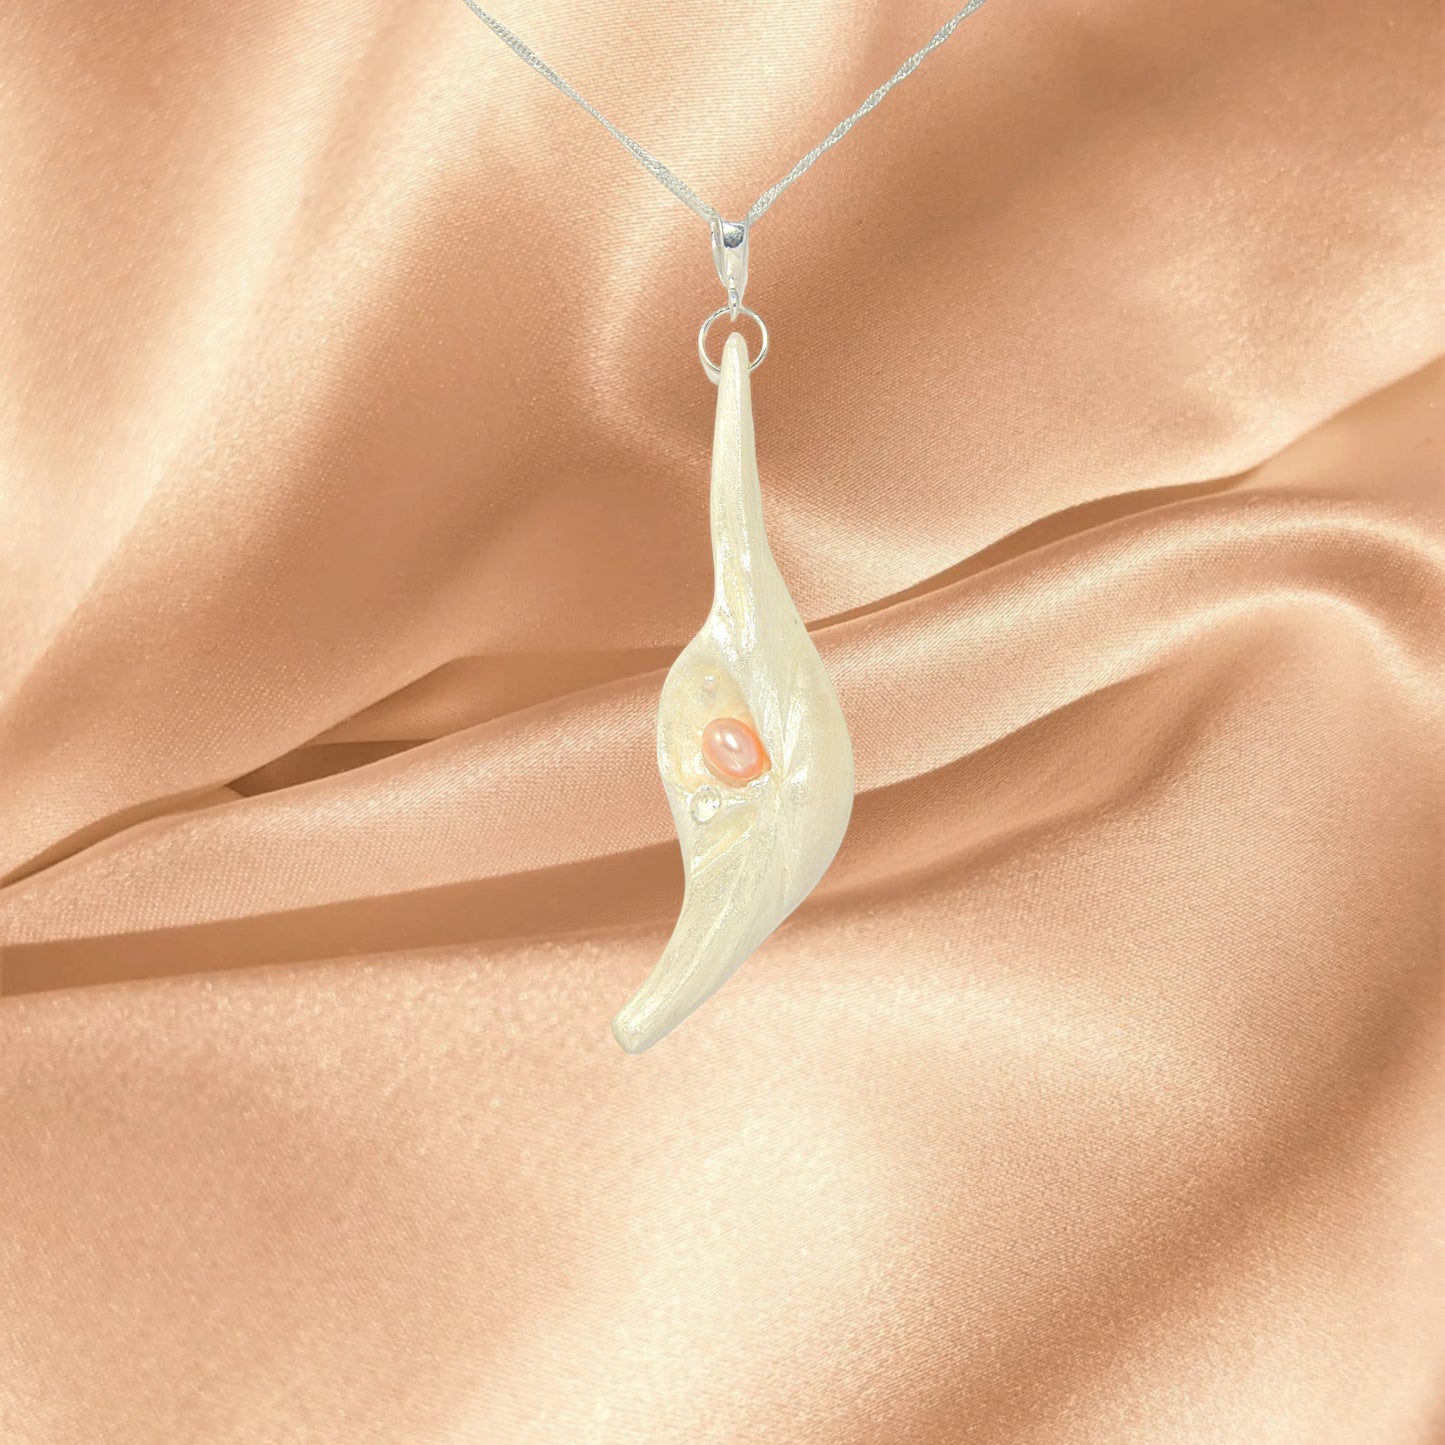 Nefertiti natural seashell and a real 8 mm pink freshwater Pearl, a baby pearl and a 5mm faceted Herkimer diamond compliments the pendant. The pendant is draped in front of a peach satin.